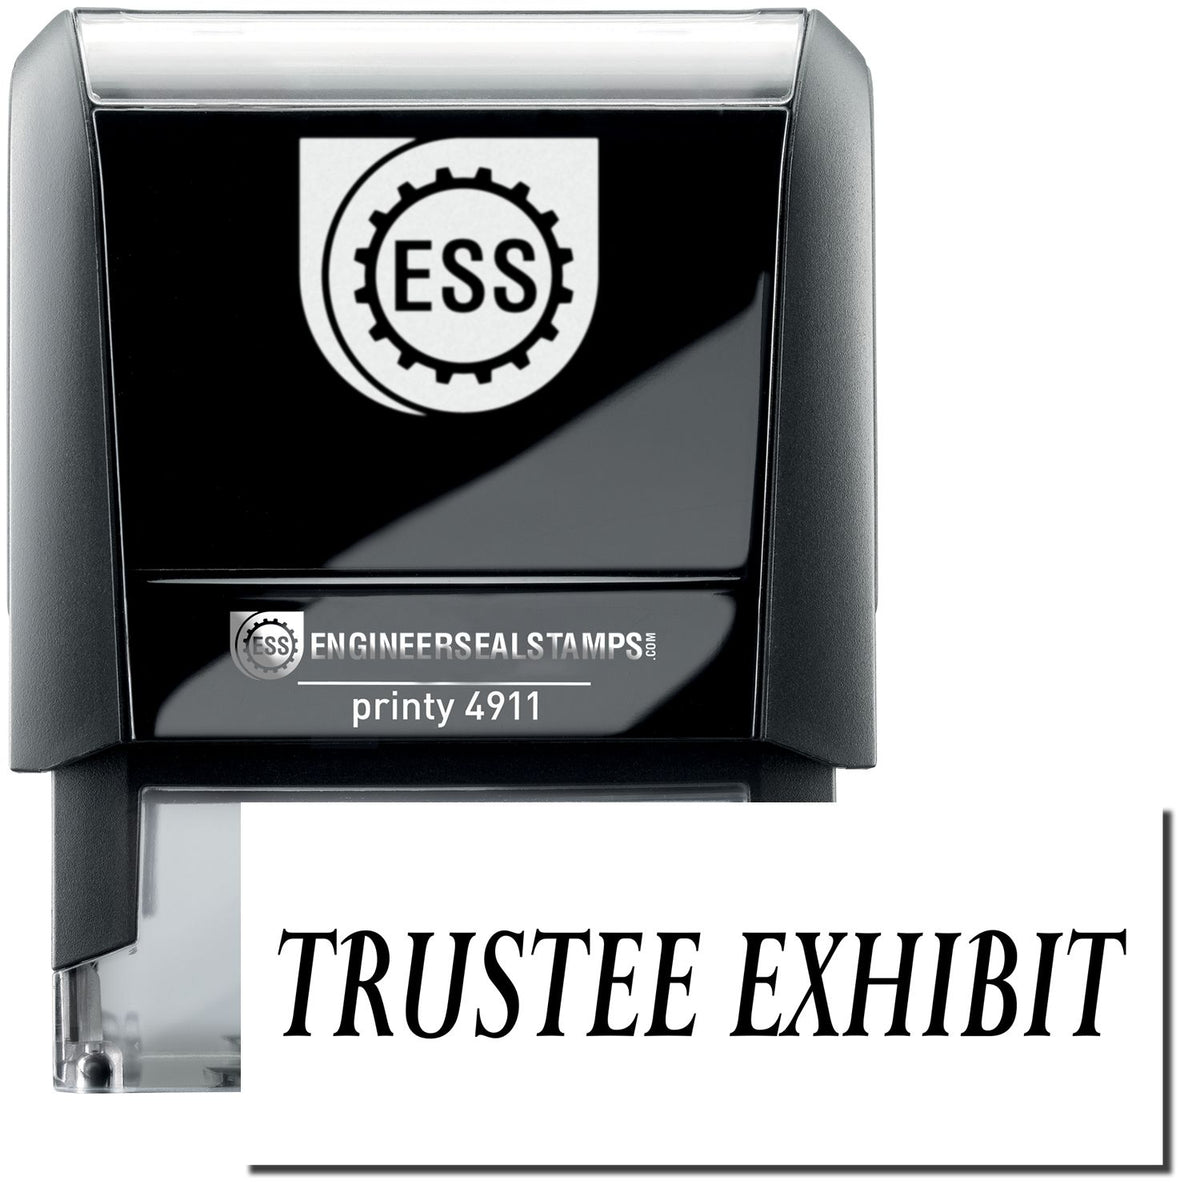 A self-inking stamp with a stamped image showing how the text &quot;TRUSTEE EXHIBIT&quot; is displayed after stamping.